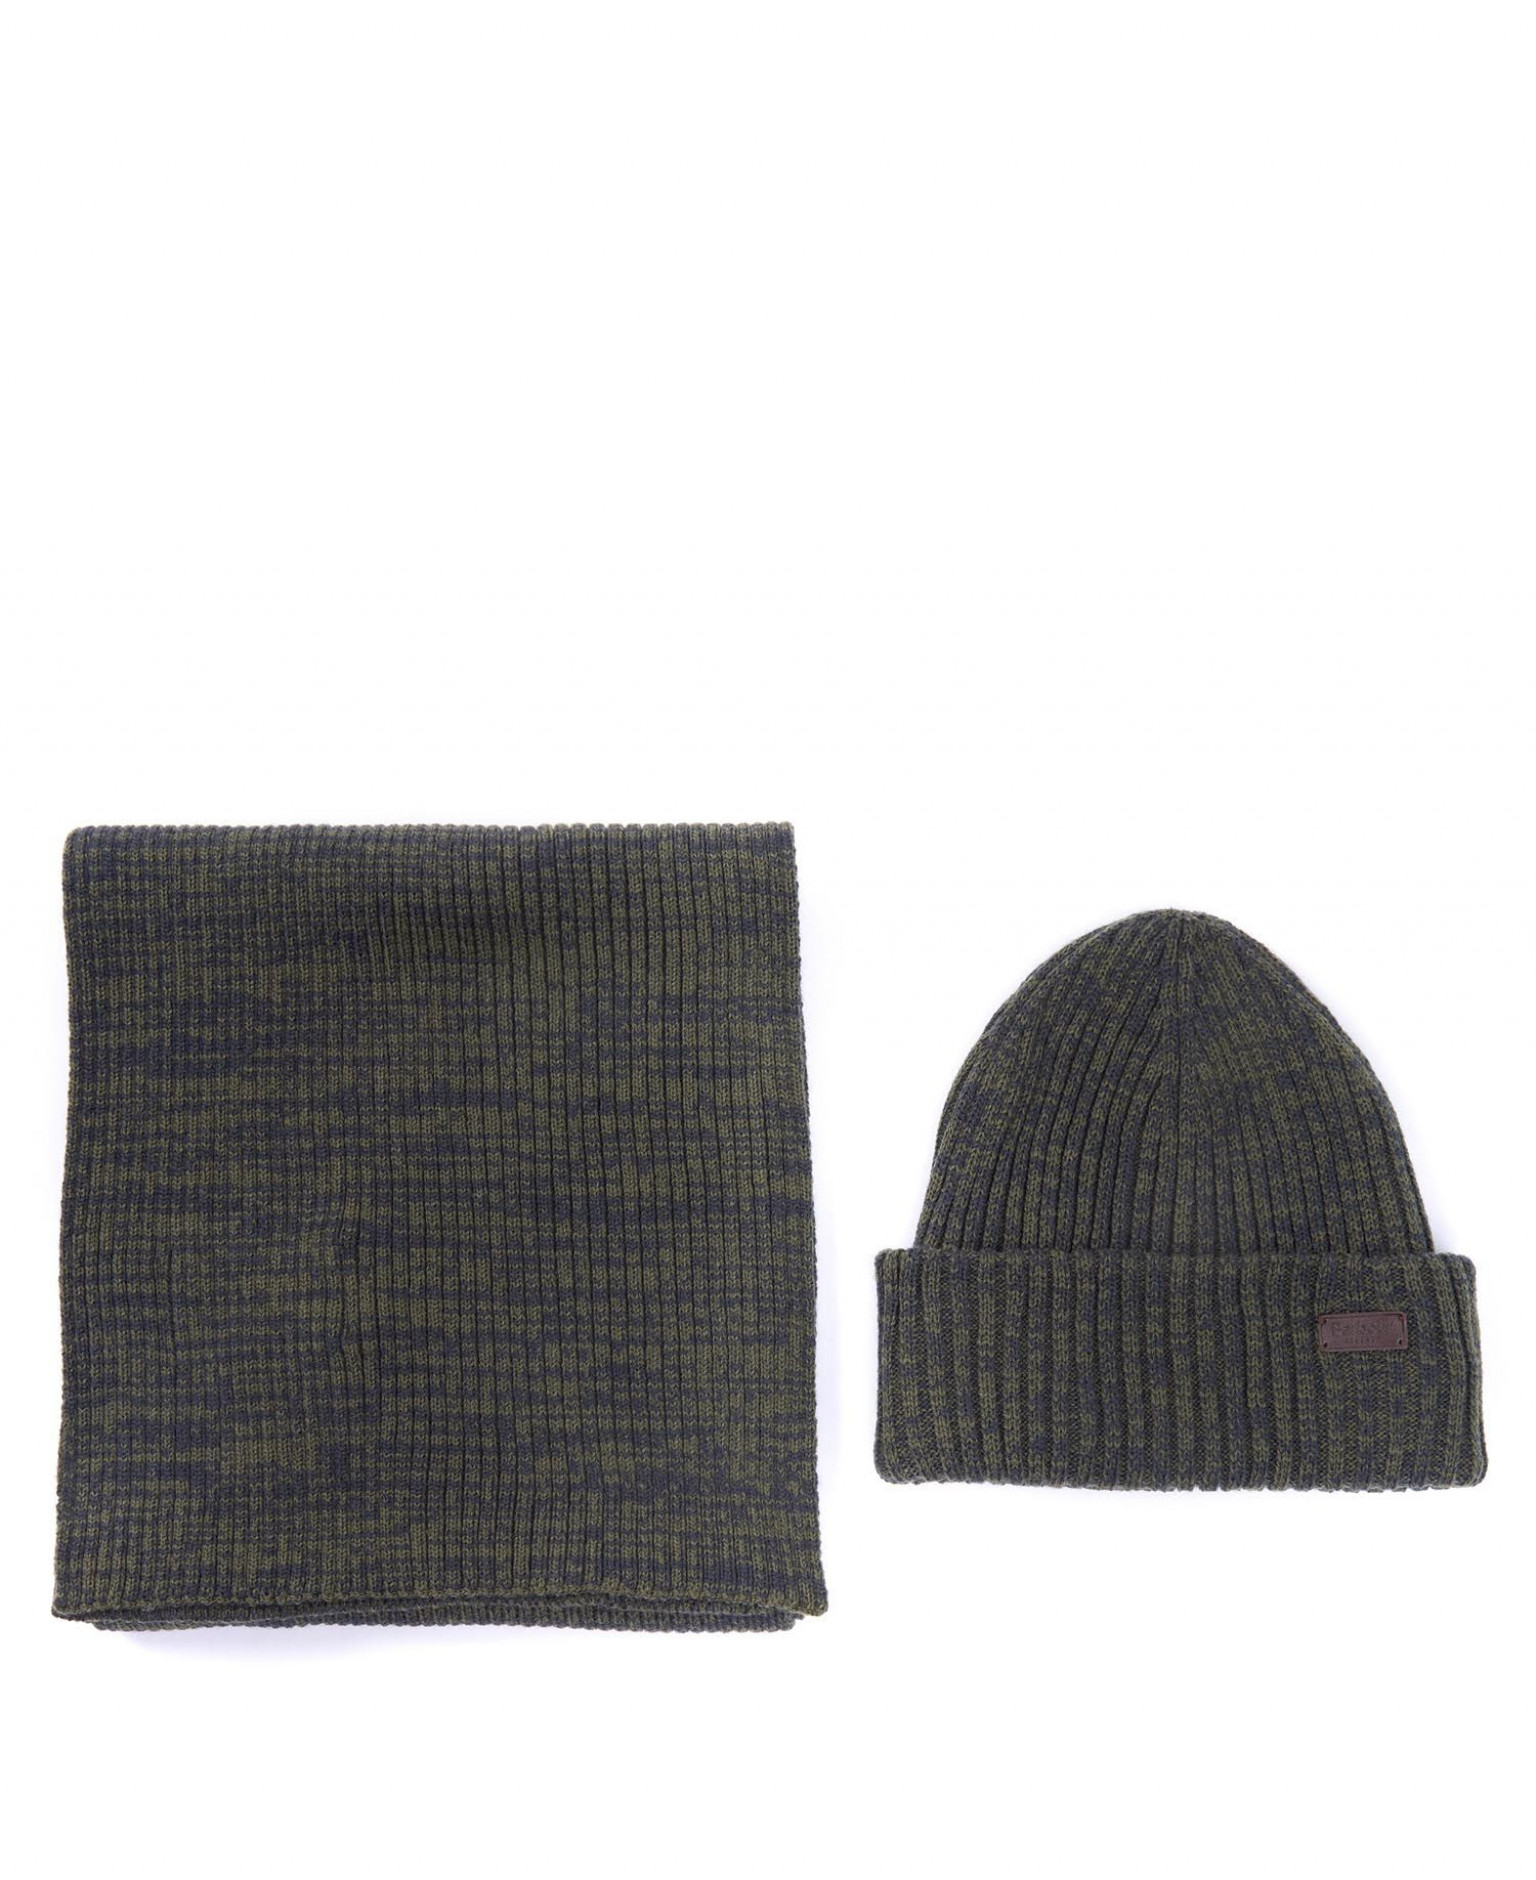 Barbour Crimdon Beanie And Scarf Set Olive